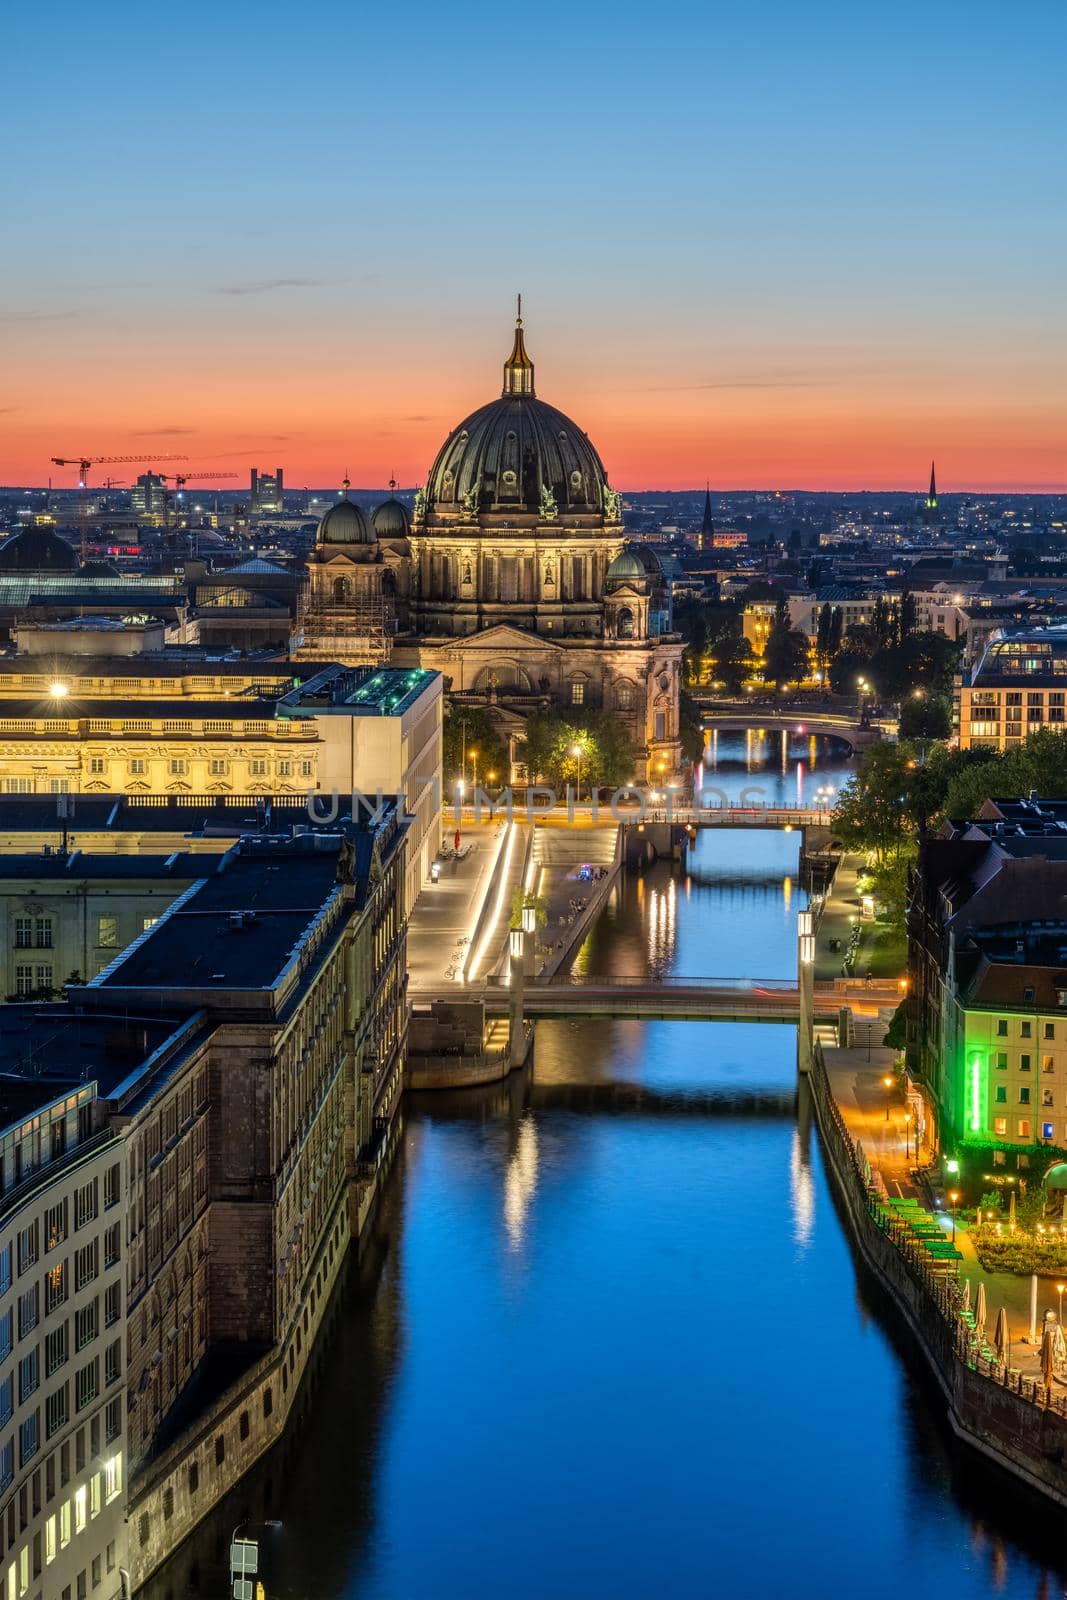 The river Spree in Berlin at night with the cathedral in the back